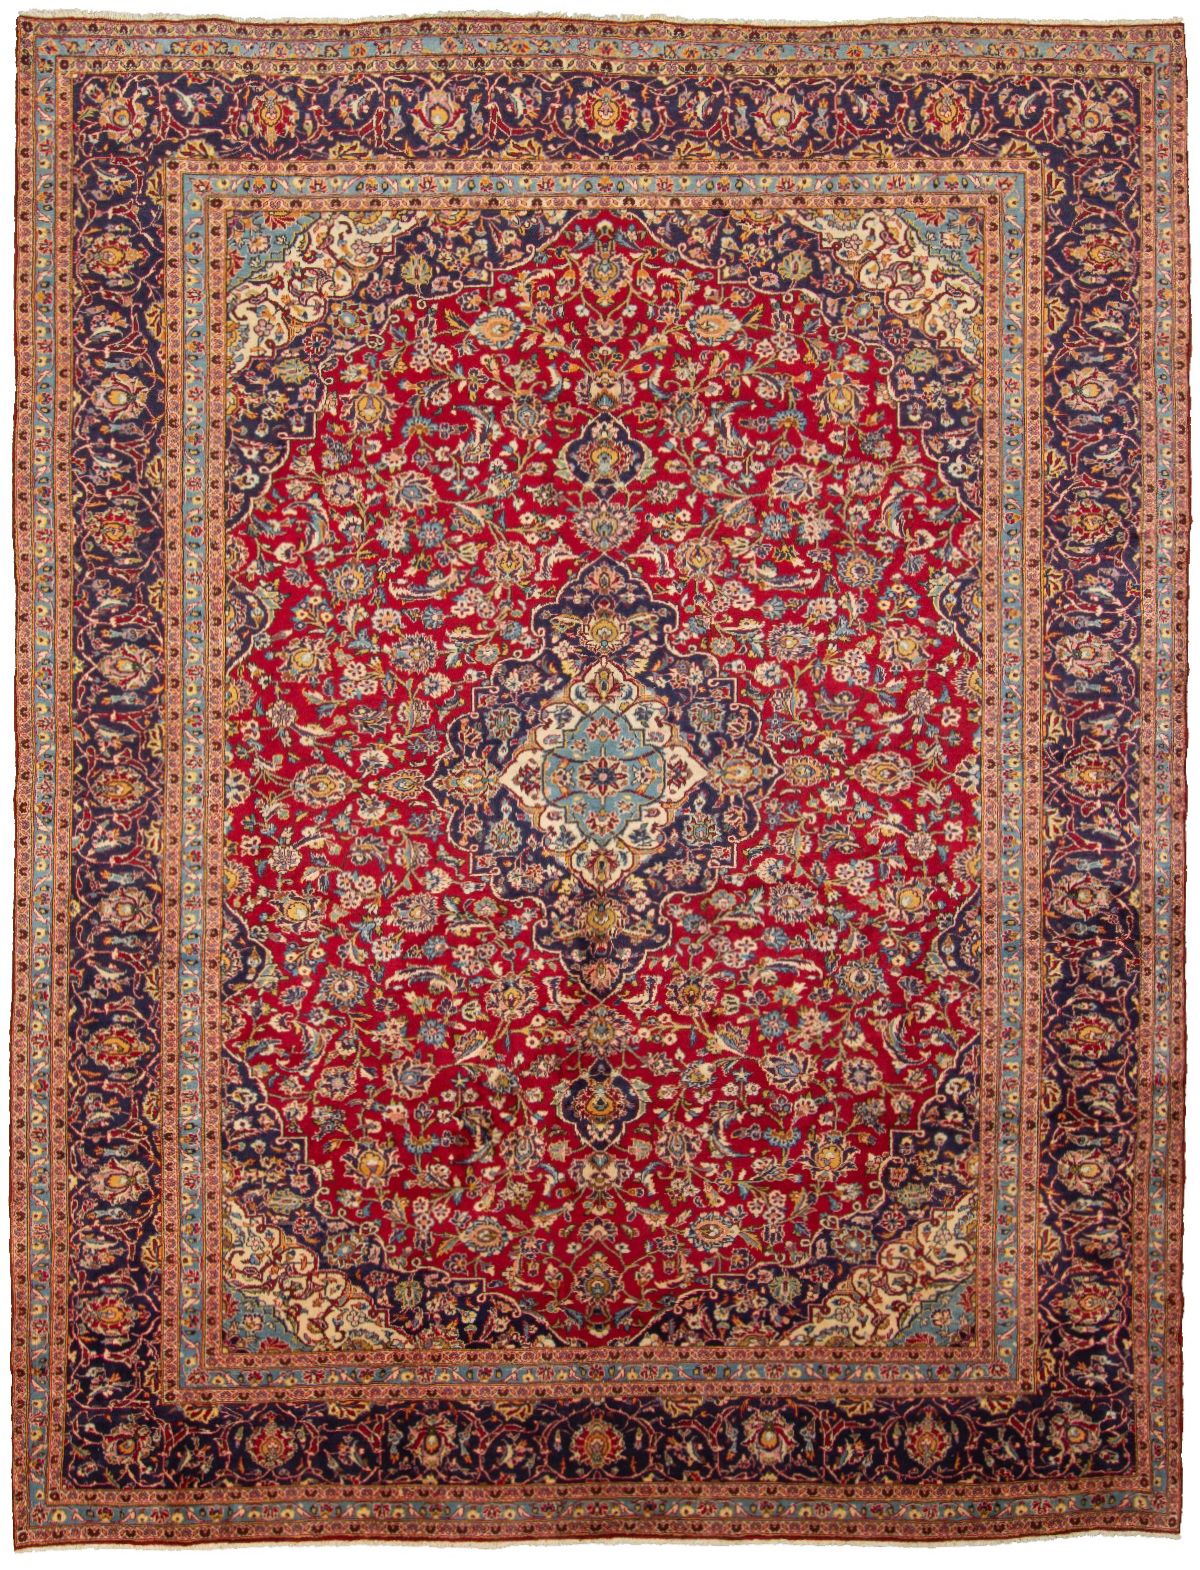 Hand-knotted Kashan  Wool Rug 10'0" x 12'10"  Size: 10'0" x 12'10"  